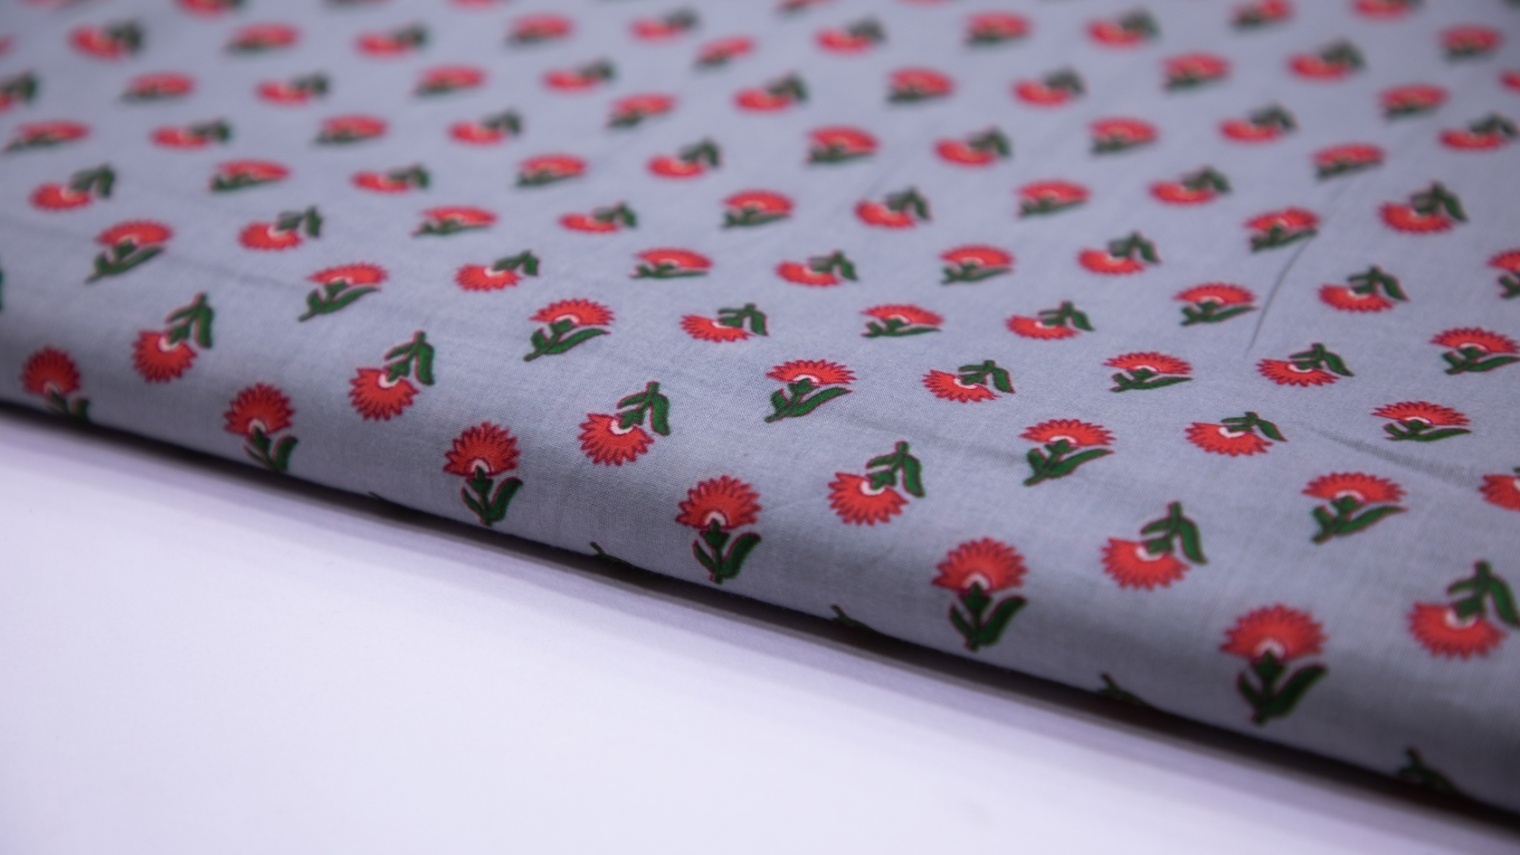 STONE GREY COLOR COTTON SCREEN PRINT JAIPURI RED FLORAL MOTIF FABRIC - 5885